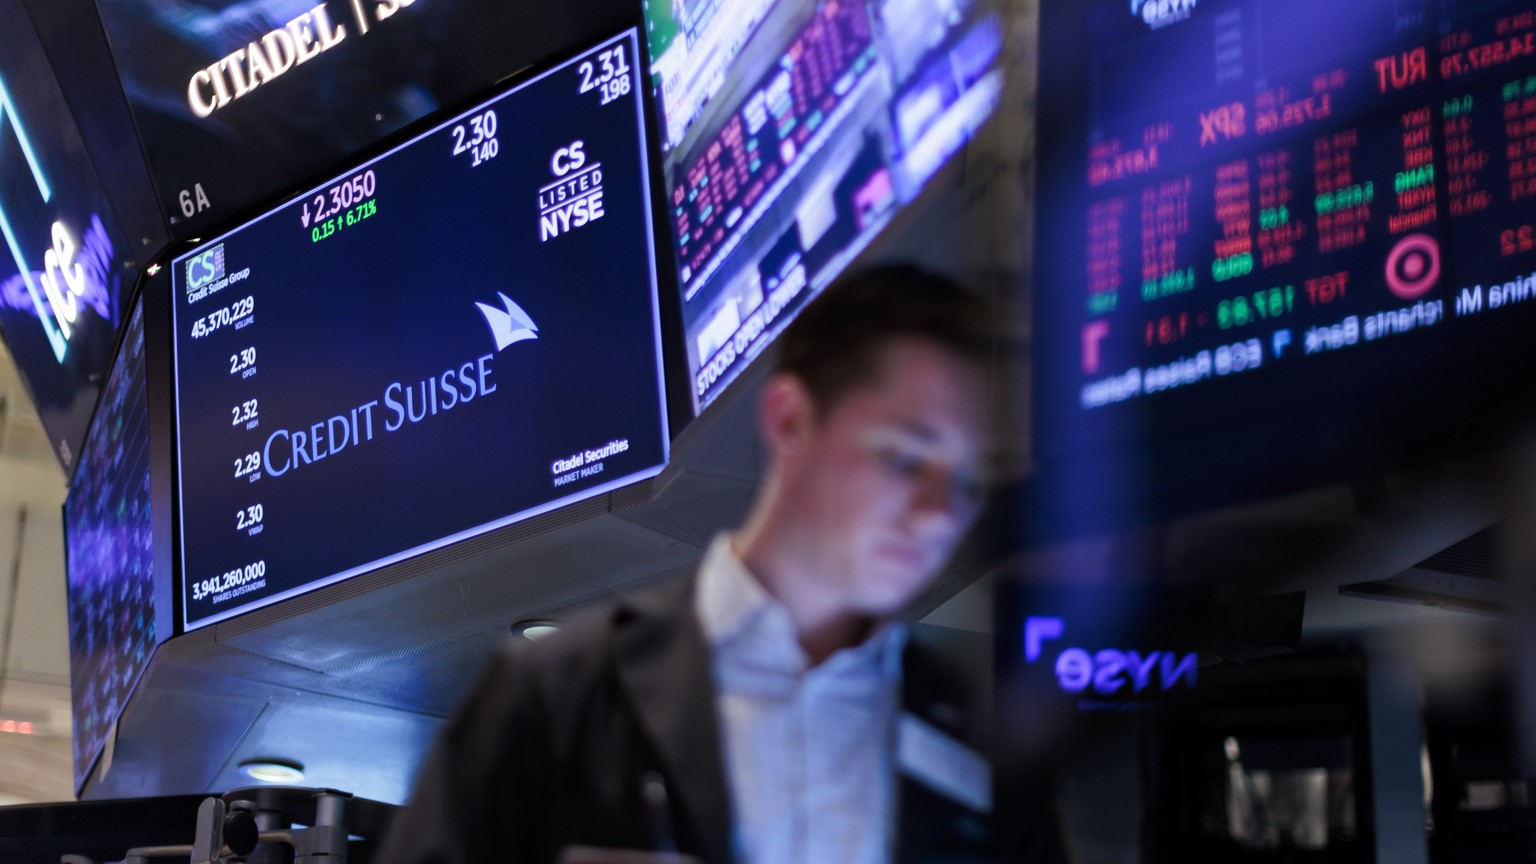 epa10526579 A screen shows information about Credit Suisse stock price on the floor of the New York Stock Exchange in New York, New York, USA, on 16 March 2023. Credit Suisse shares were up on 16 Marc ...